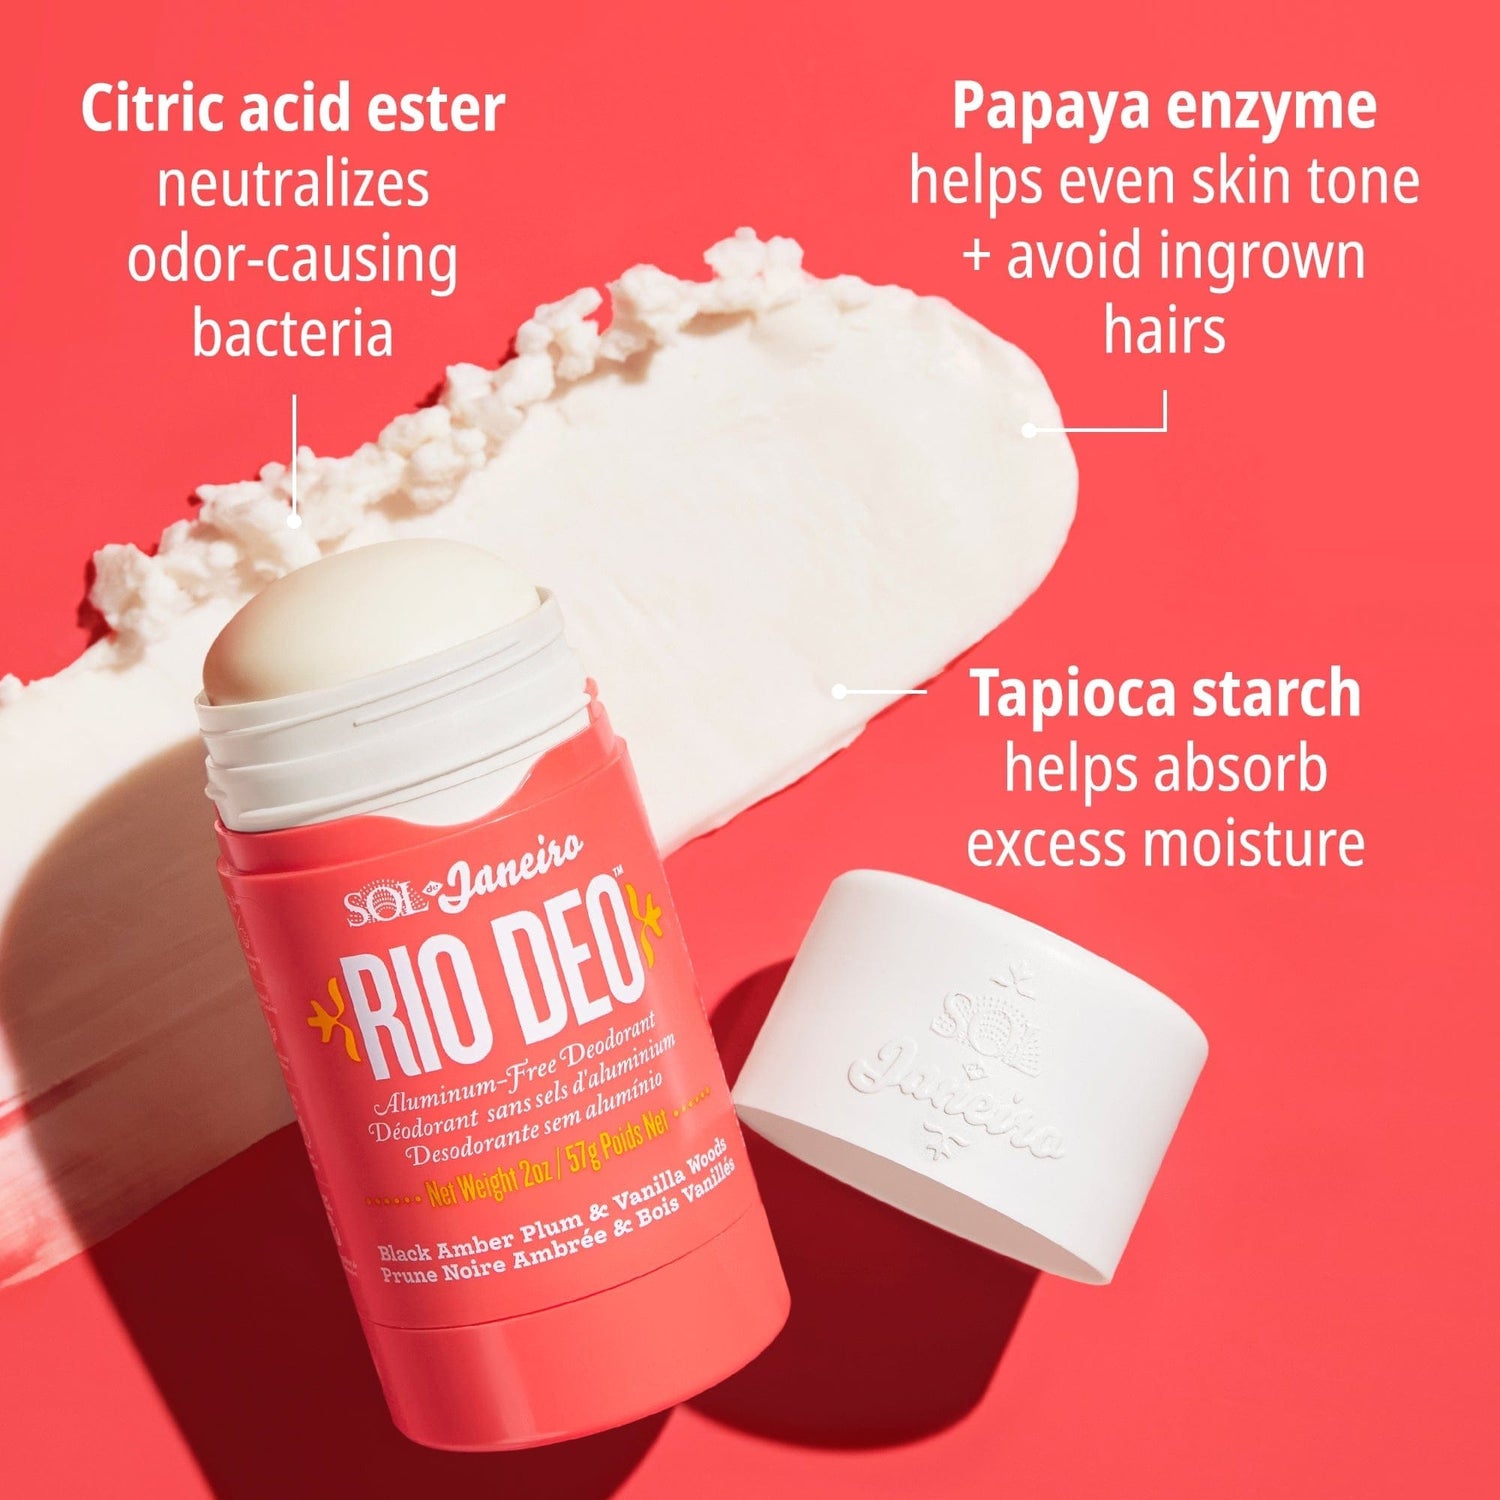 Citric acid ester neutralizes odor causing bacteria, papaya enzyme helps even skin tone + avoid ingrown hairs, tapioca starch helps absorb excess moisture